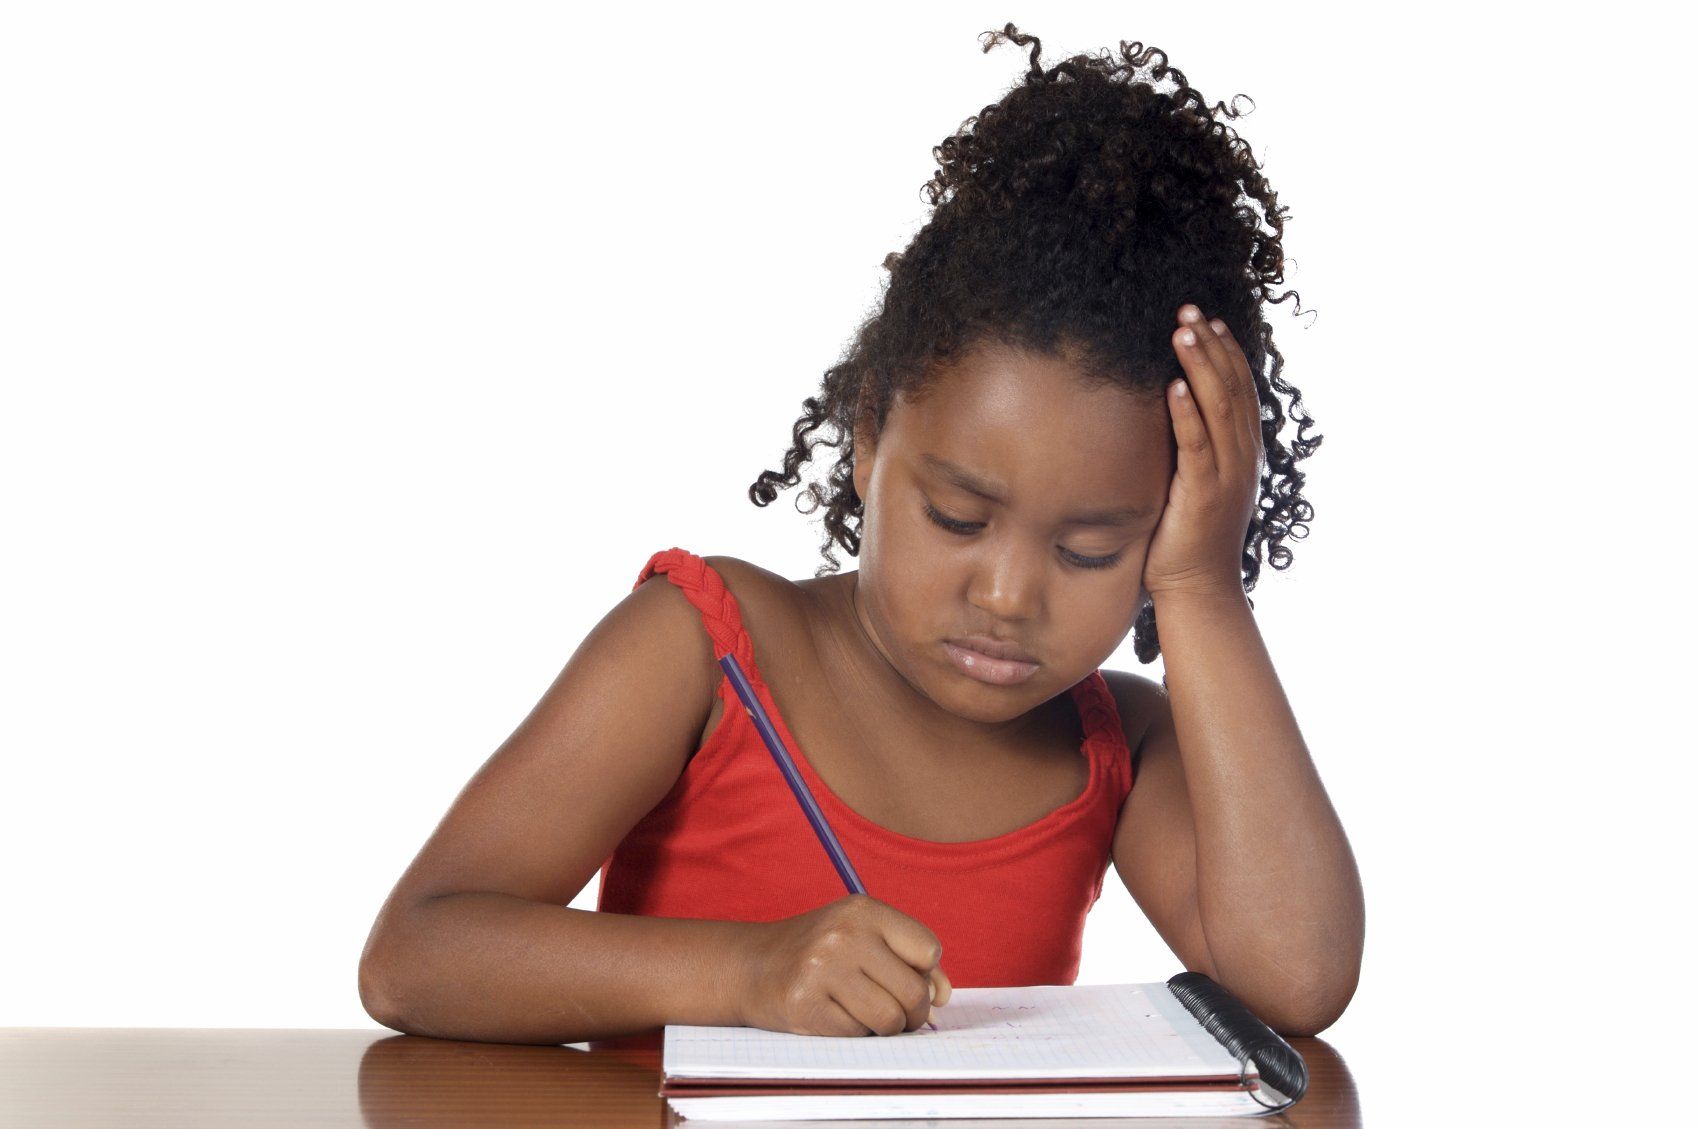 Pretty, young black child in red blouse, writing with a blue pencil